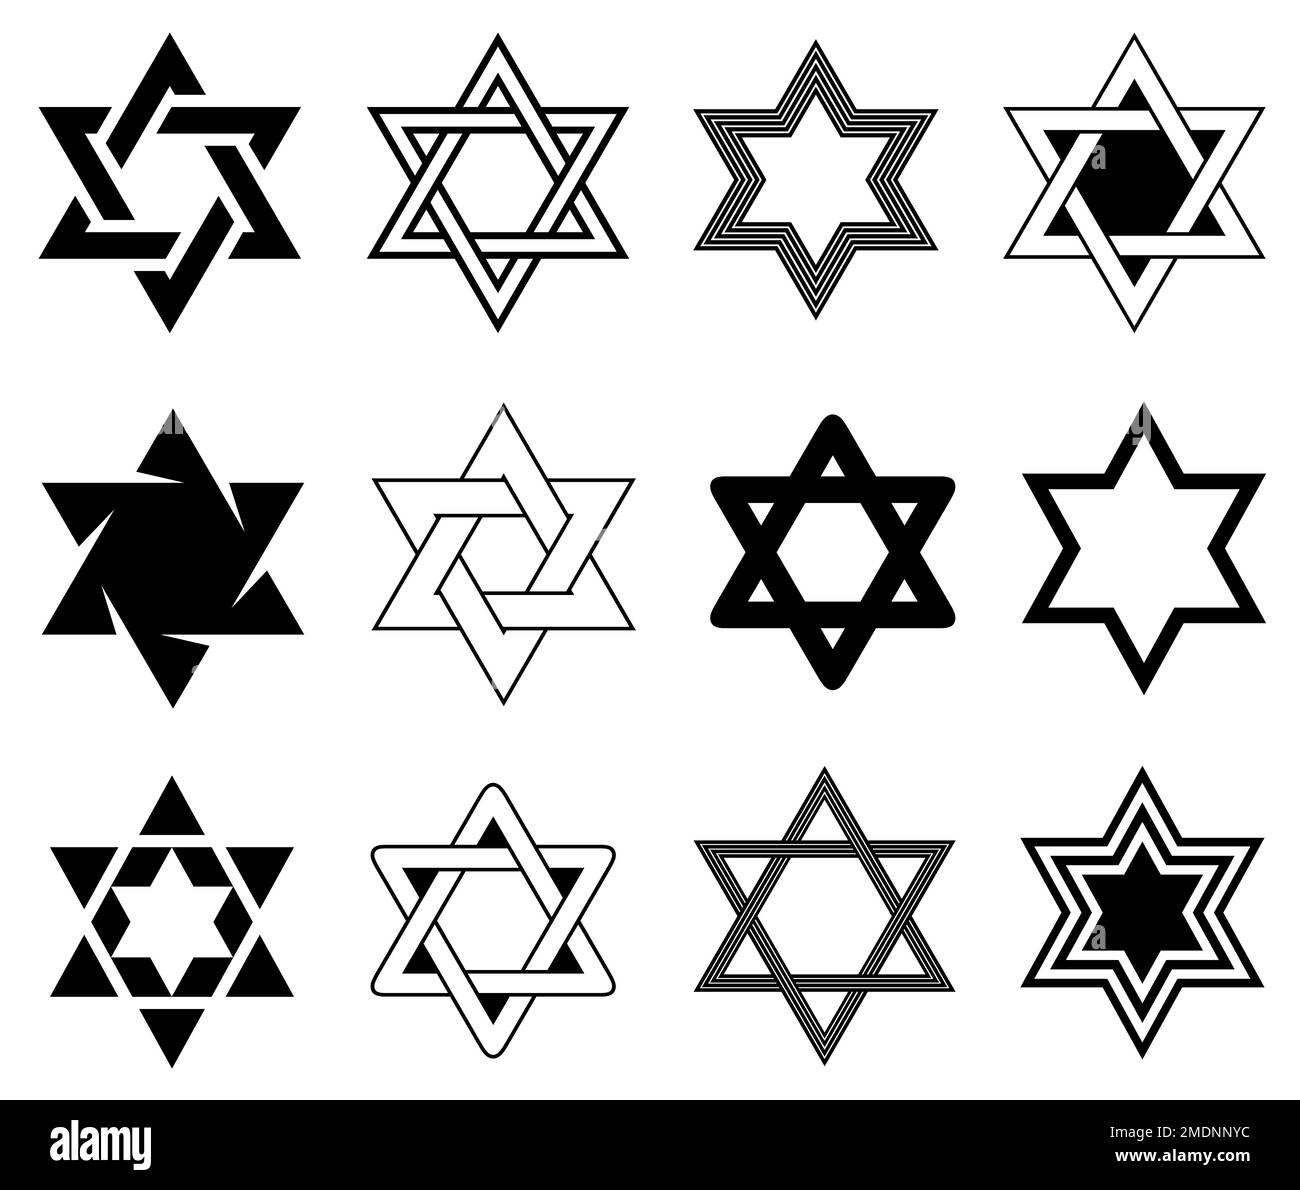 Collection of different Star of David illustrations isolated on white Stock Photo